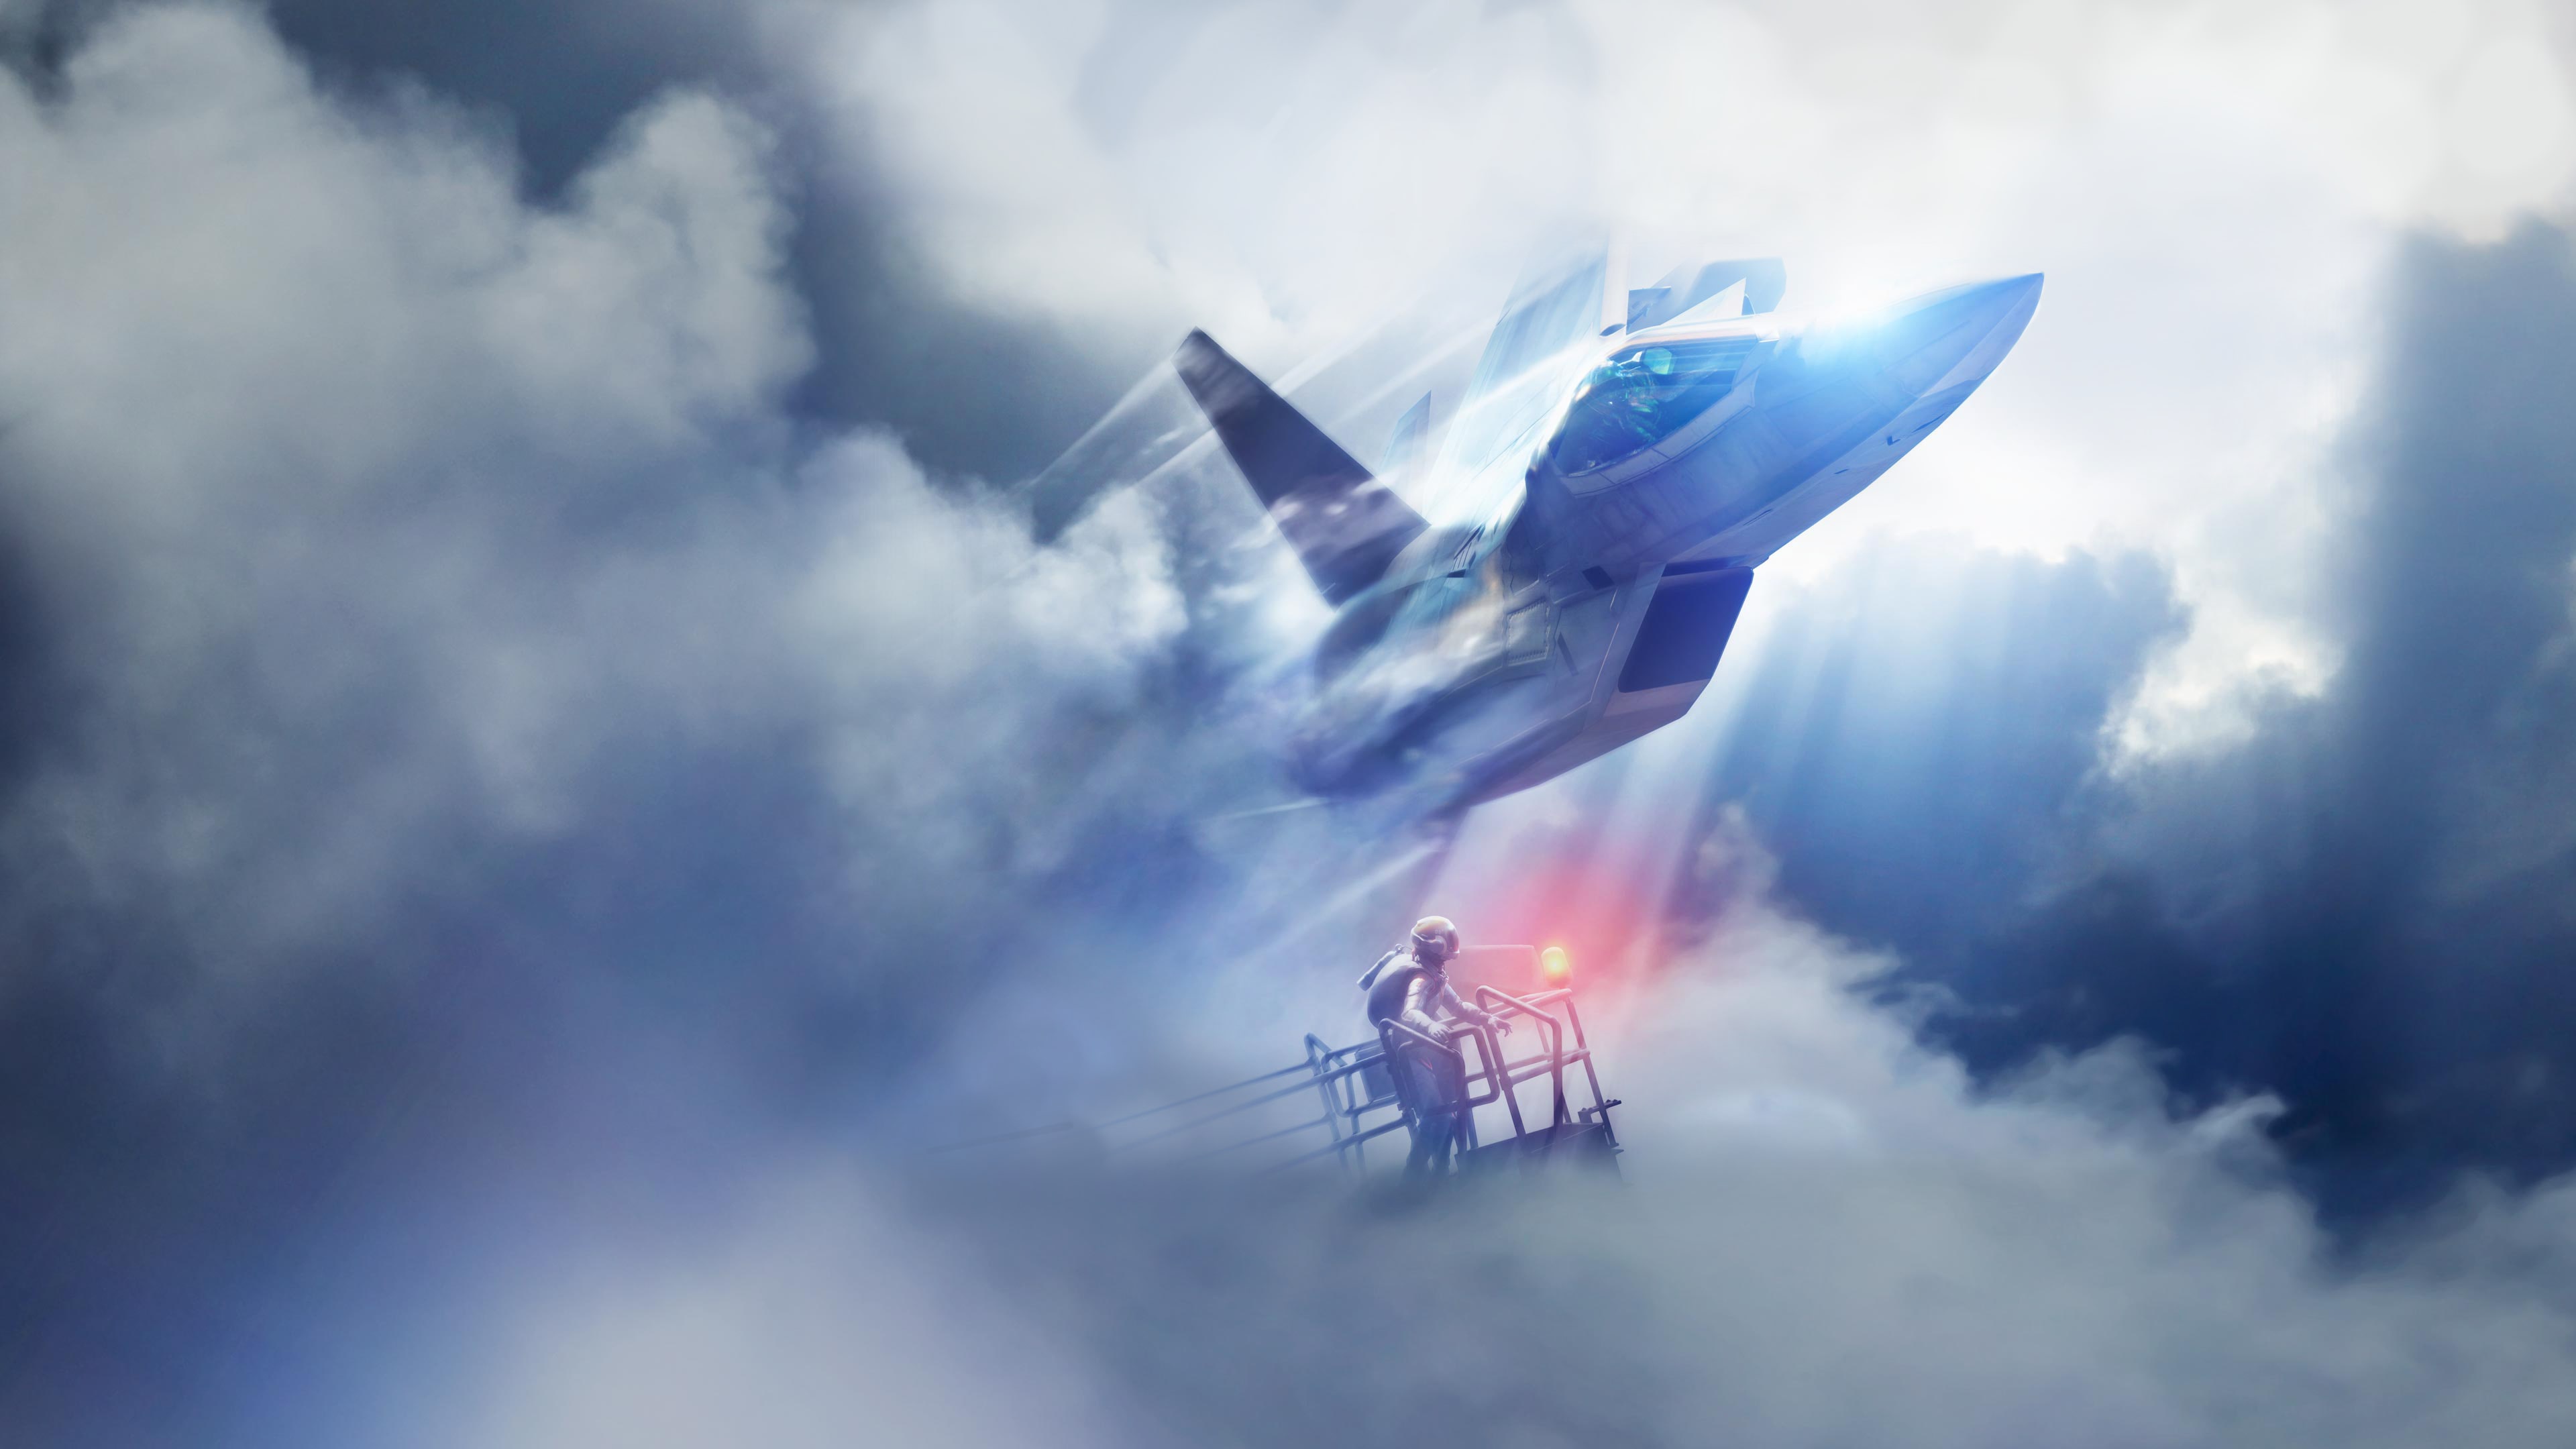 ACE COMBAT™ 7: SKIES UNKNOWN (English, Japanese)